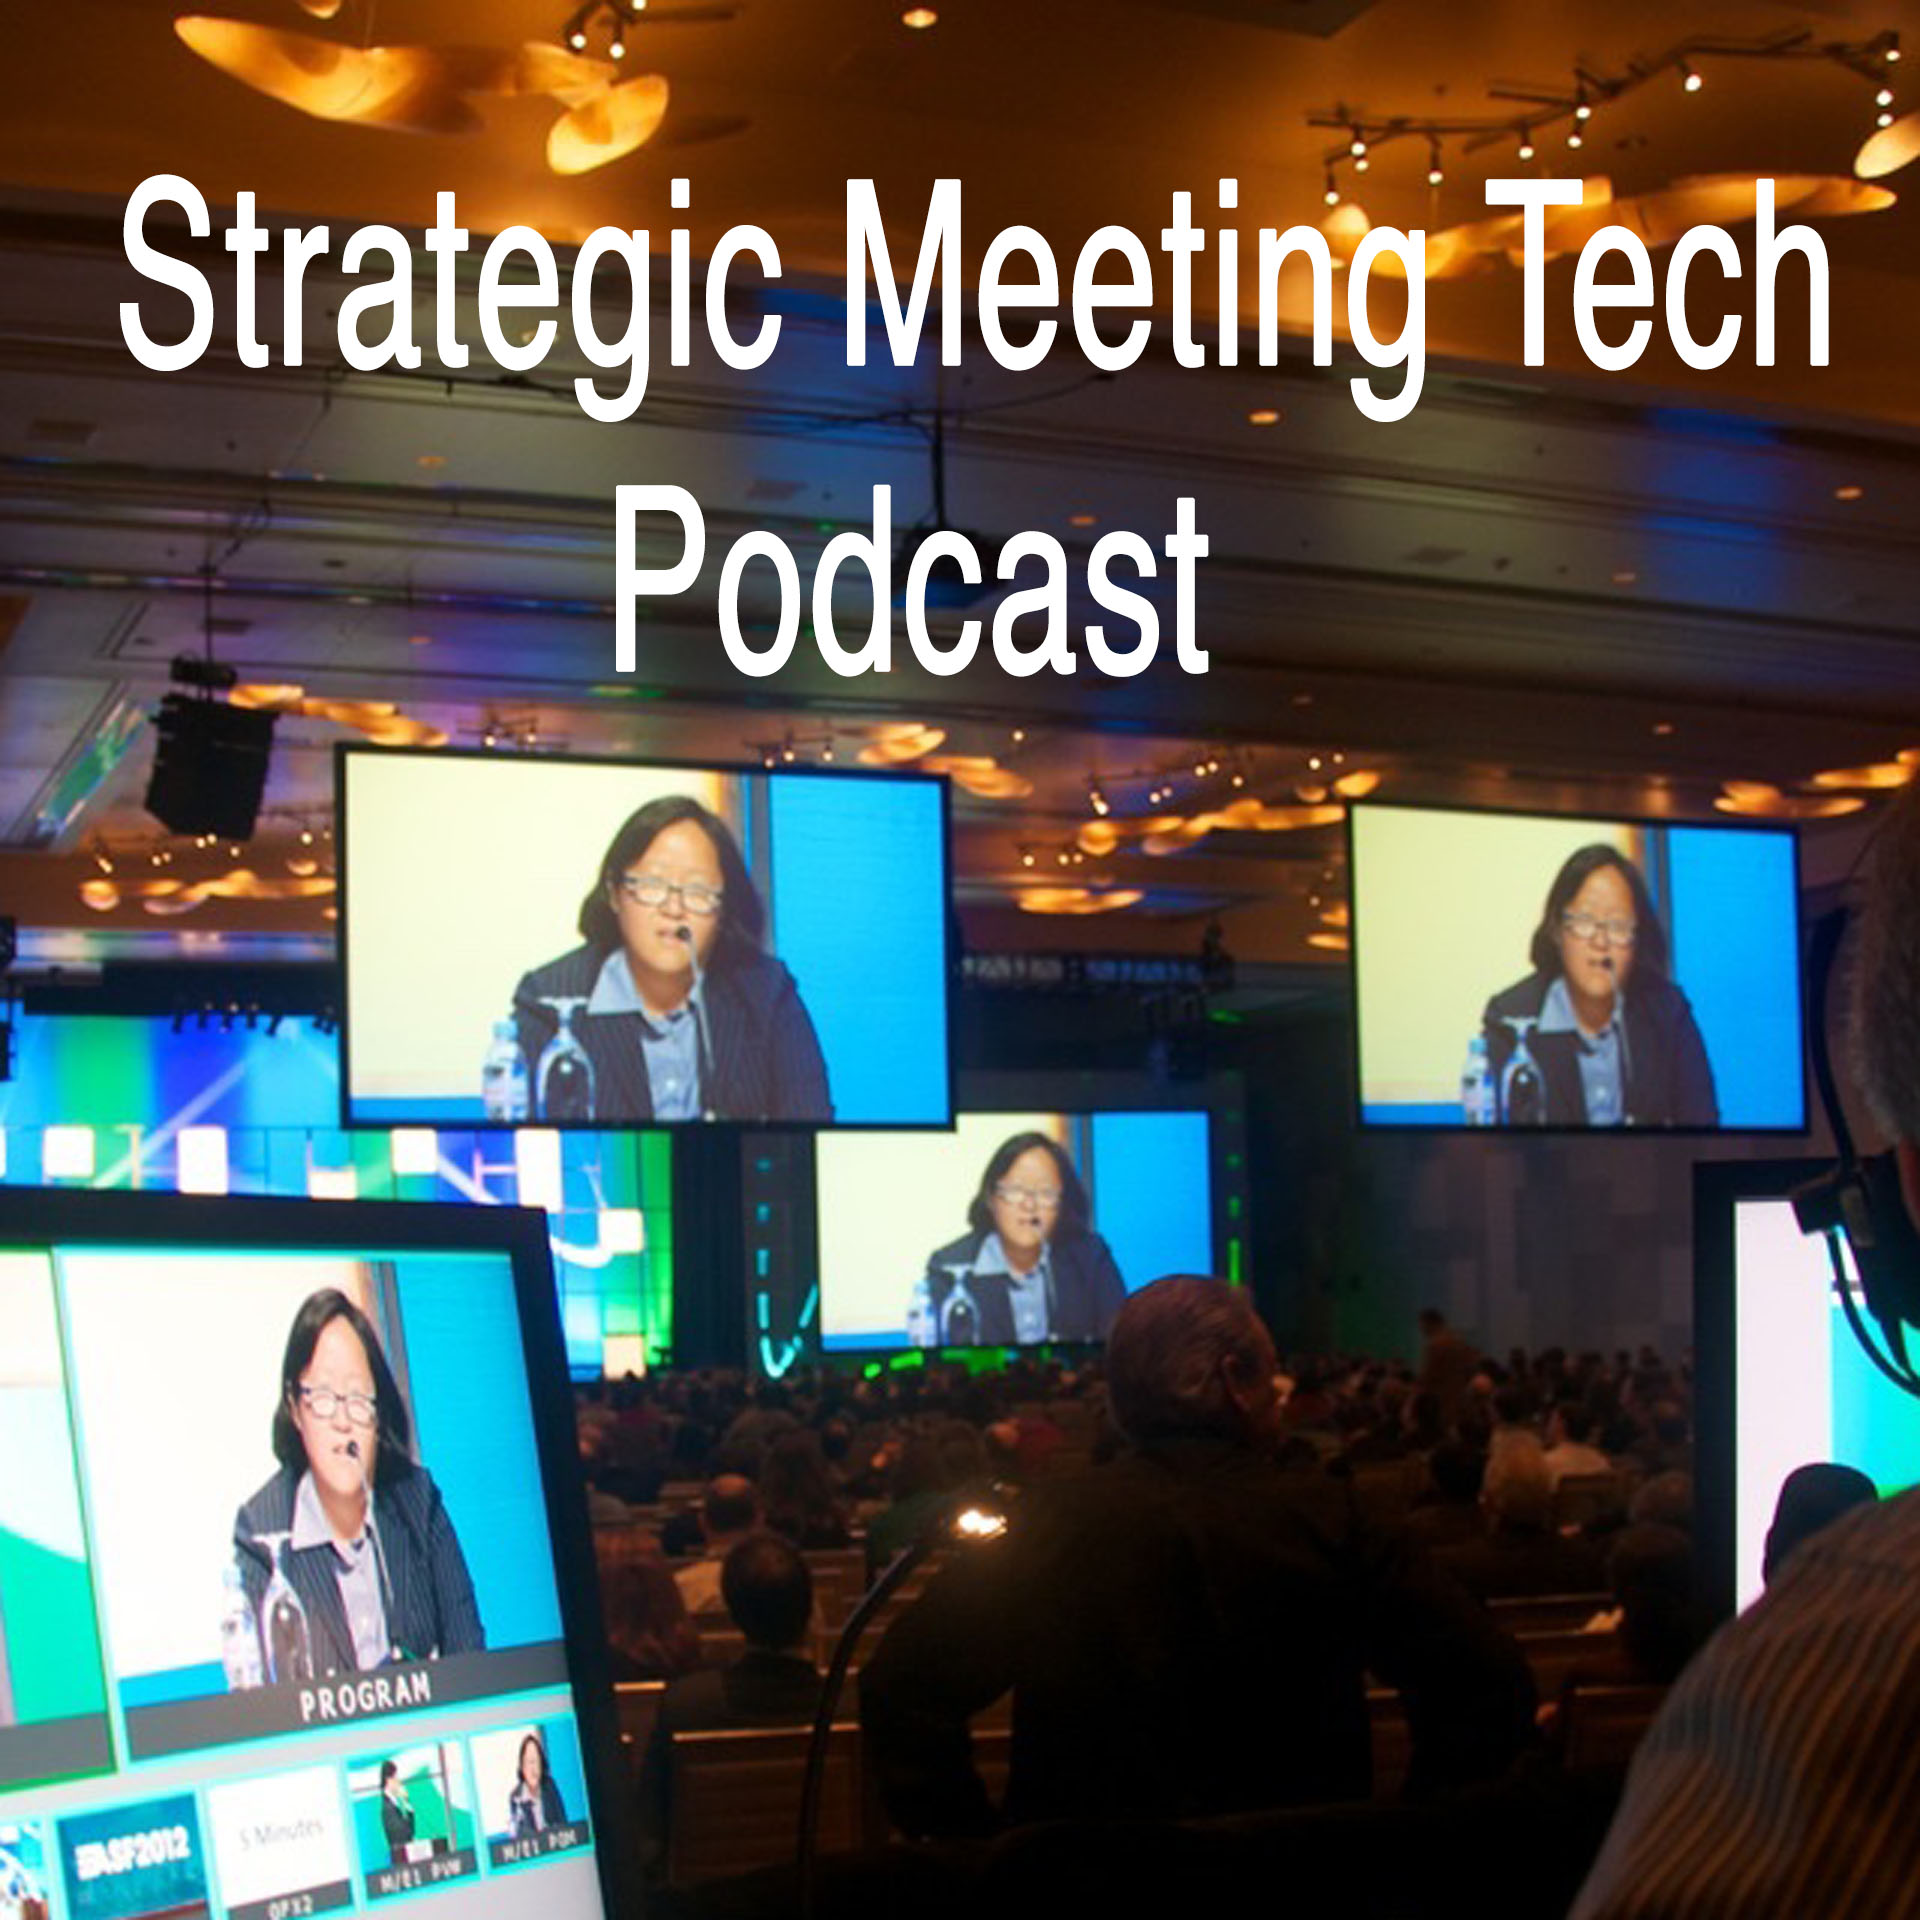 Strategic Meeting Tech Podcast Show #21 - Lee Ann Benavides previews “Trends and Shifts in Hotel Sales Landscapes”, her upcoming panel session at the CMP Conclave